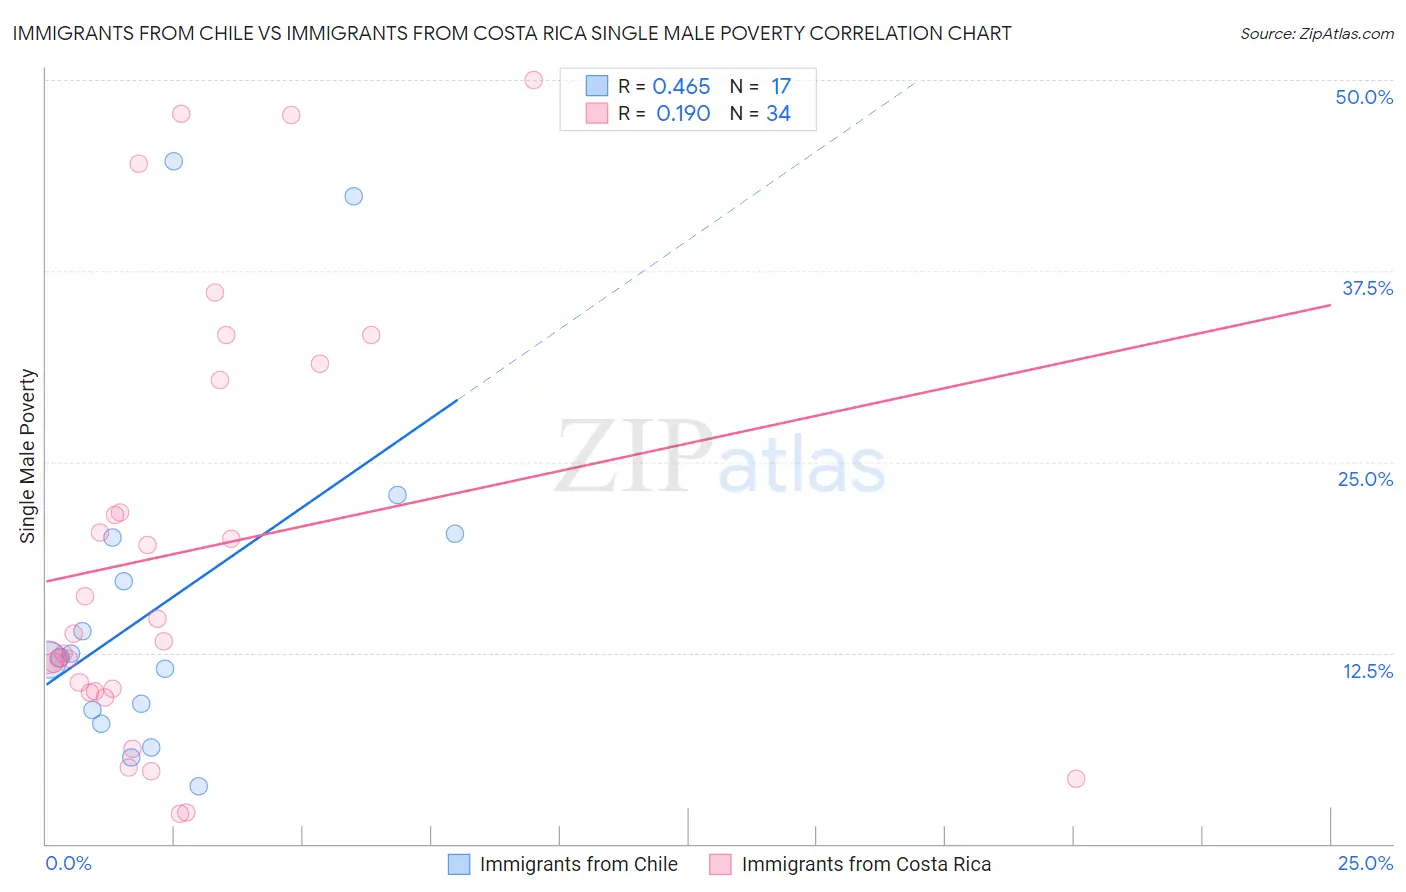 Immigrants from Chile vs Immigrants from Costa Rica Single Male Poverty